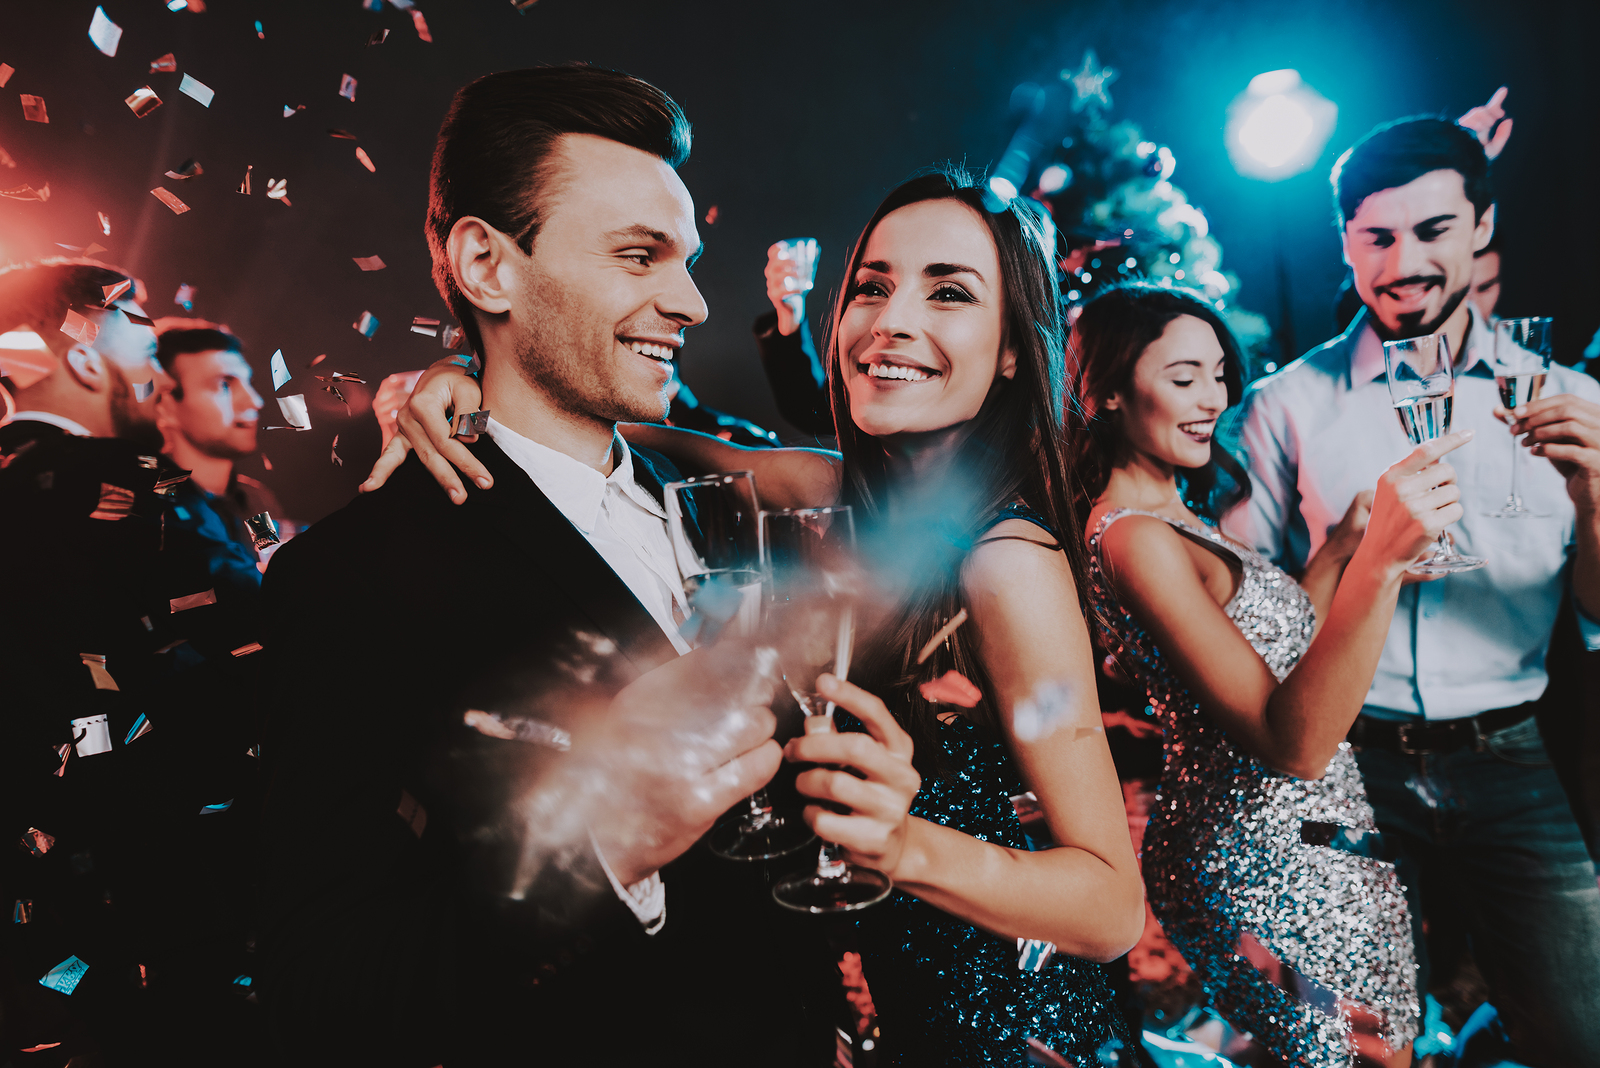 Happy Young People Dancing on New Year Party. Happy New Year Concept. Glass of Champagne. Celebrating of New Year. Young Woman in Dress. Young Man in Suit. Happy People. Modern Dances.